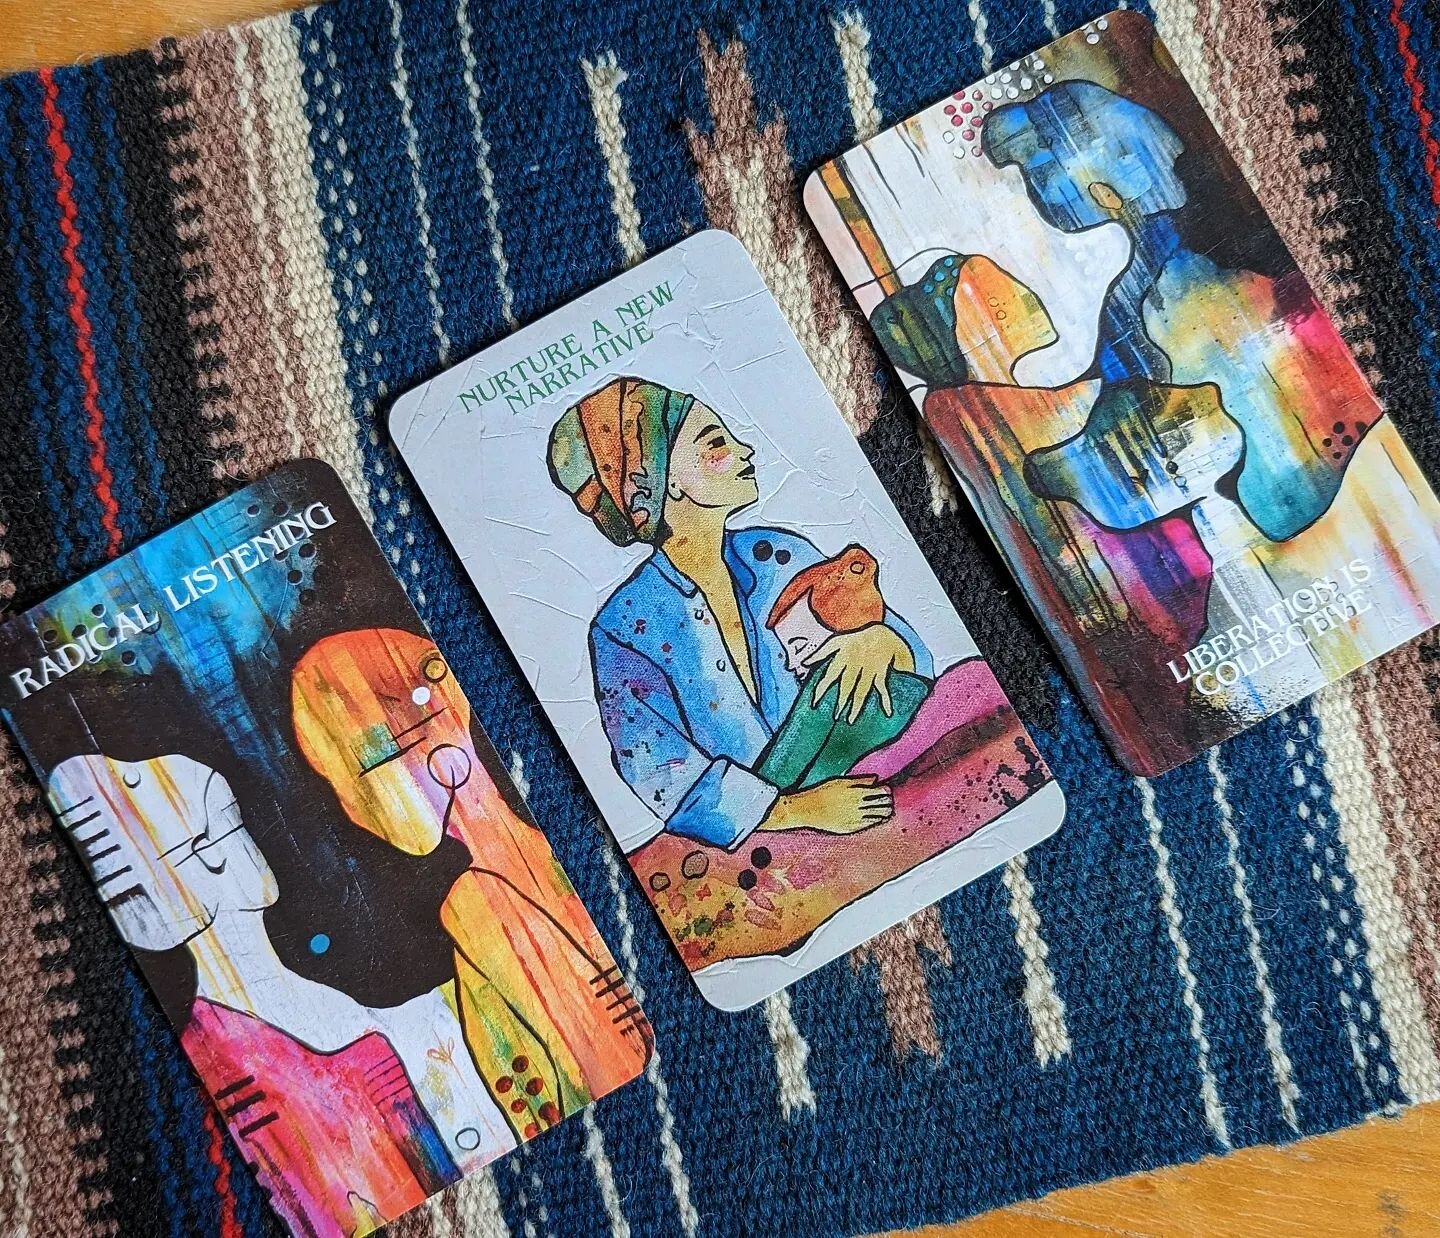 Here's a little 3-card reading I did just for you and me. I asked, &quot;What do I need to know or remember as I continue to show up during these heartbreaking times?&quot;

These cards are from my Creative Alchemy Oracle Deck. This deck is no longer